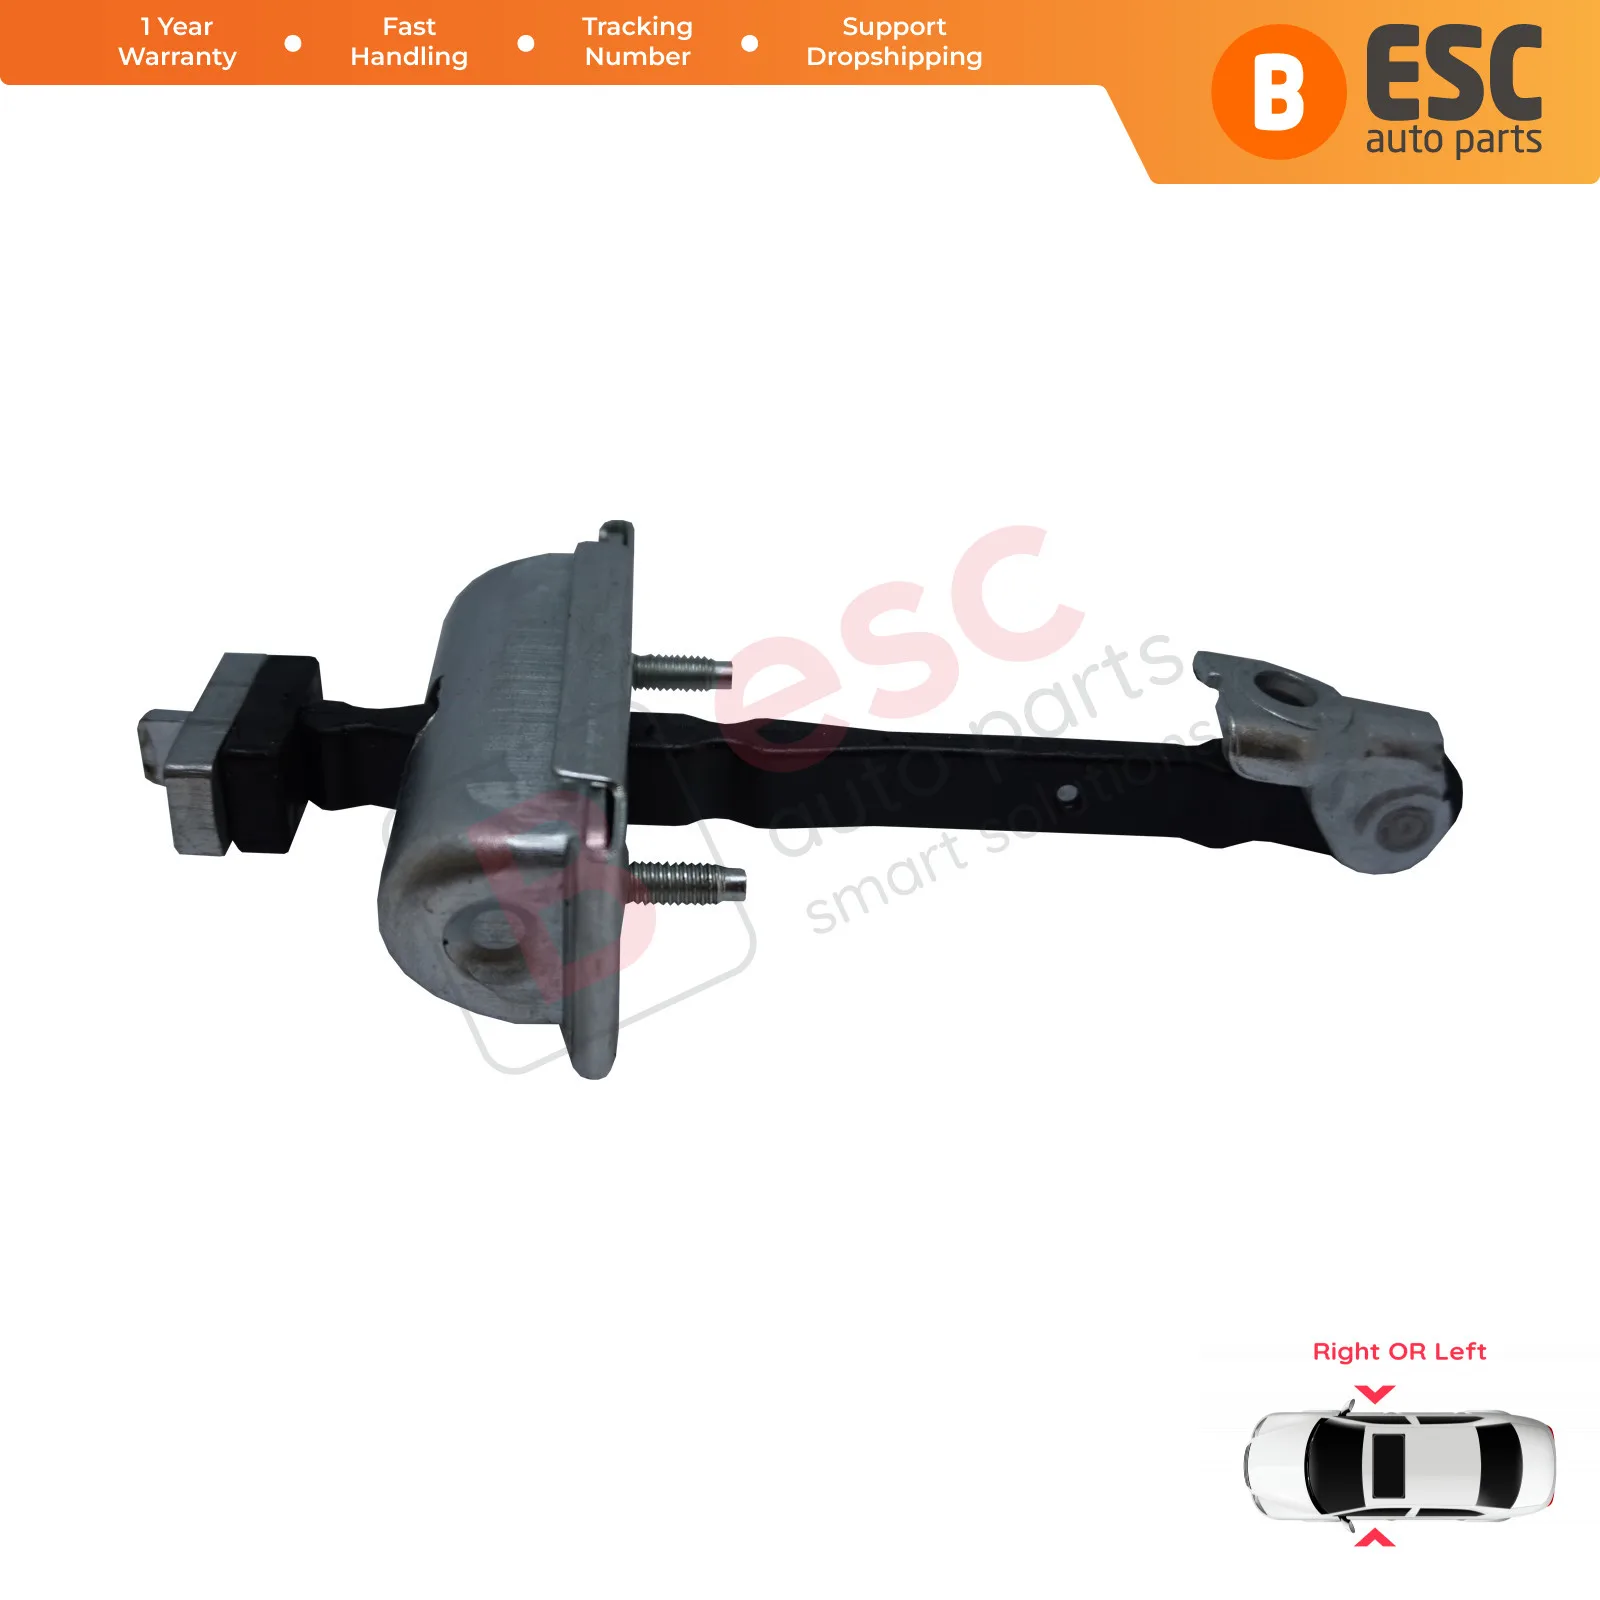 

ESC Auto Parts EDP724 Front Door Hinge Stop Check Strap Limiter 160010 for Vauxhall Opel Astra J Fast Shipment Ship From Turkey